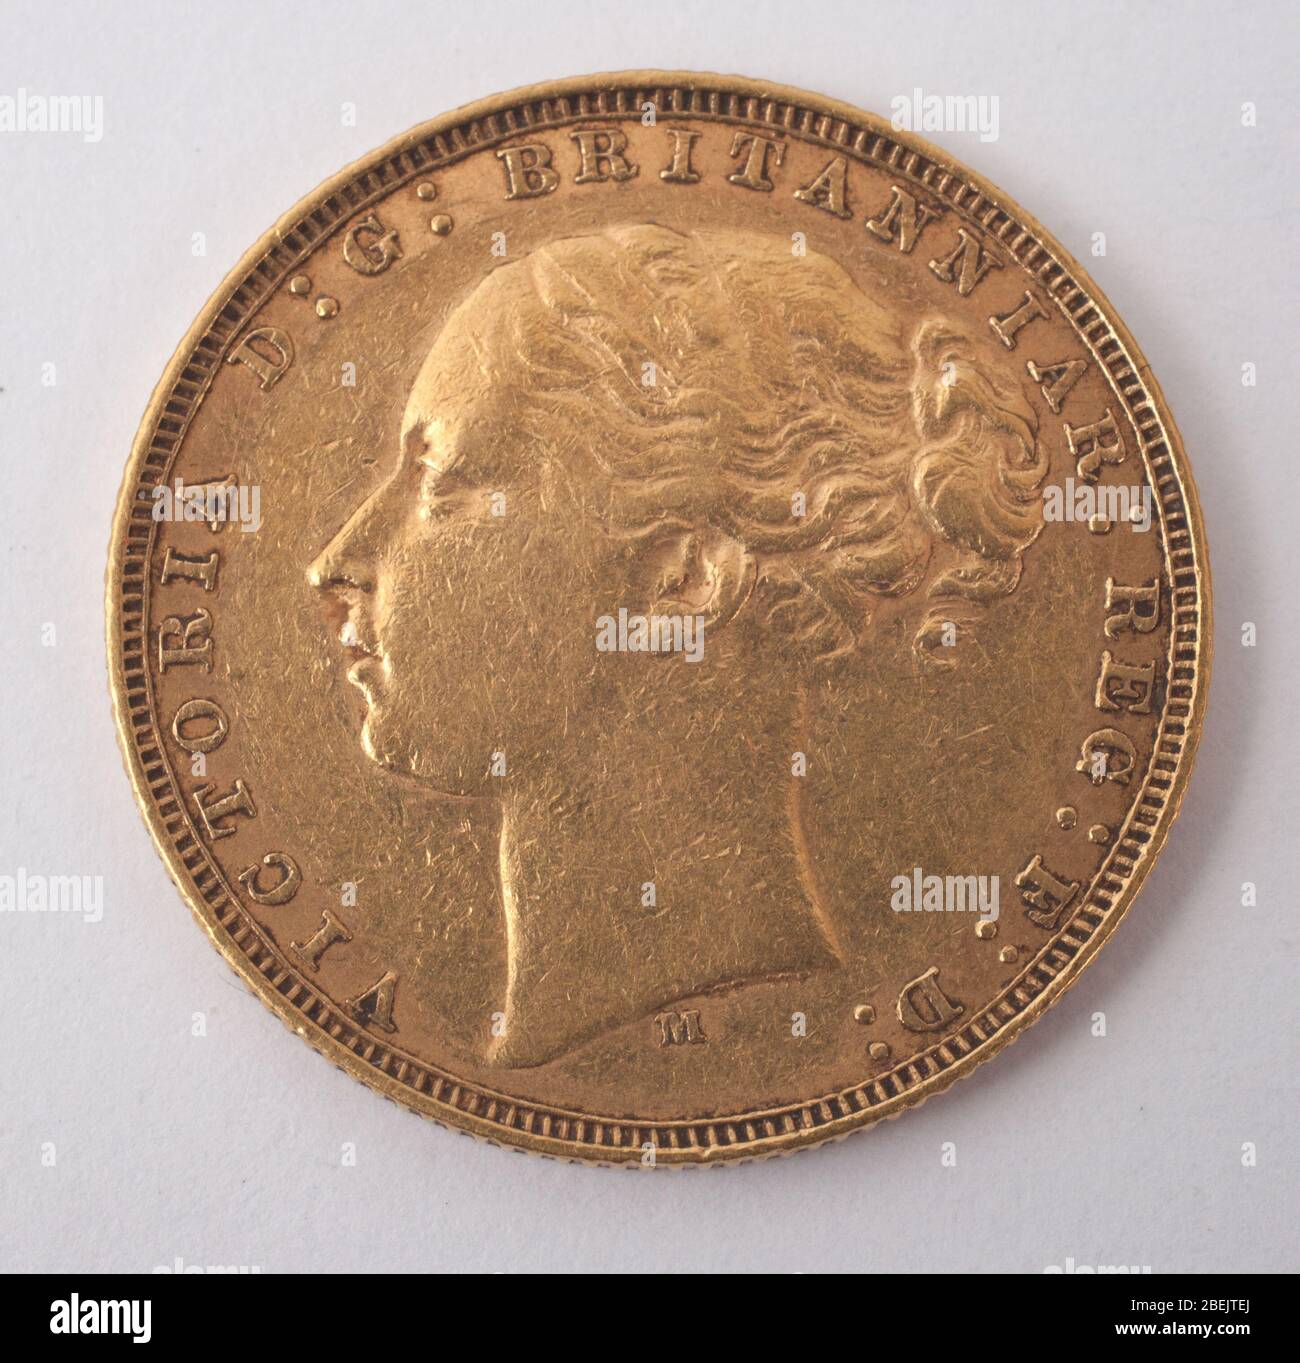 An English Gold Sovereign dated 1878 with Queen Victoria's head Stock Photo